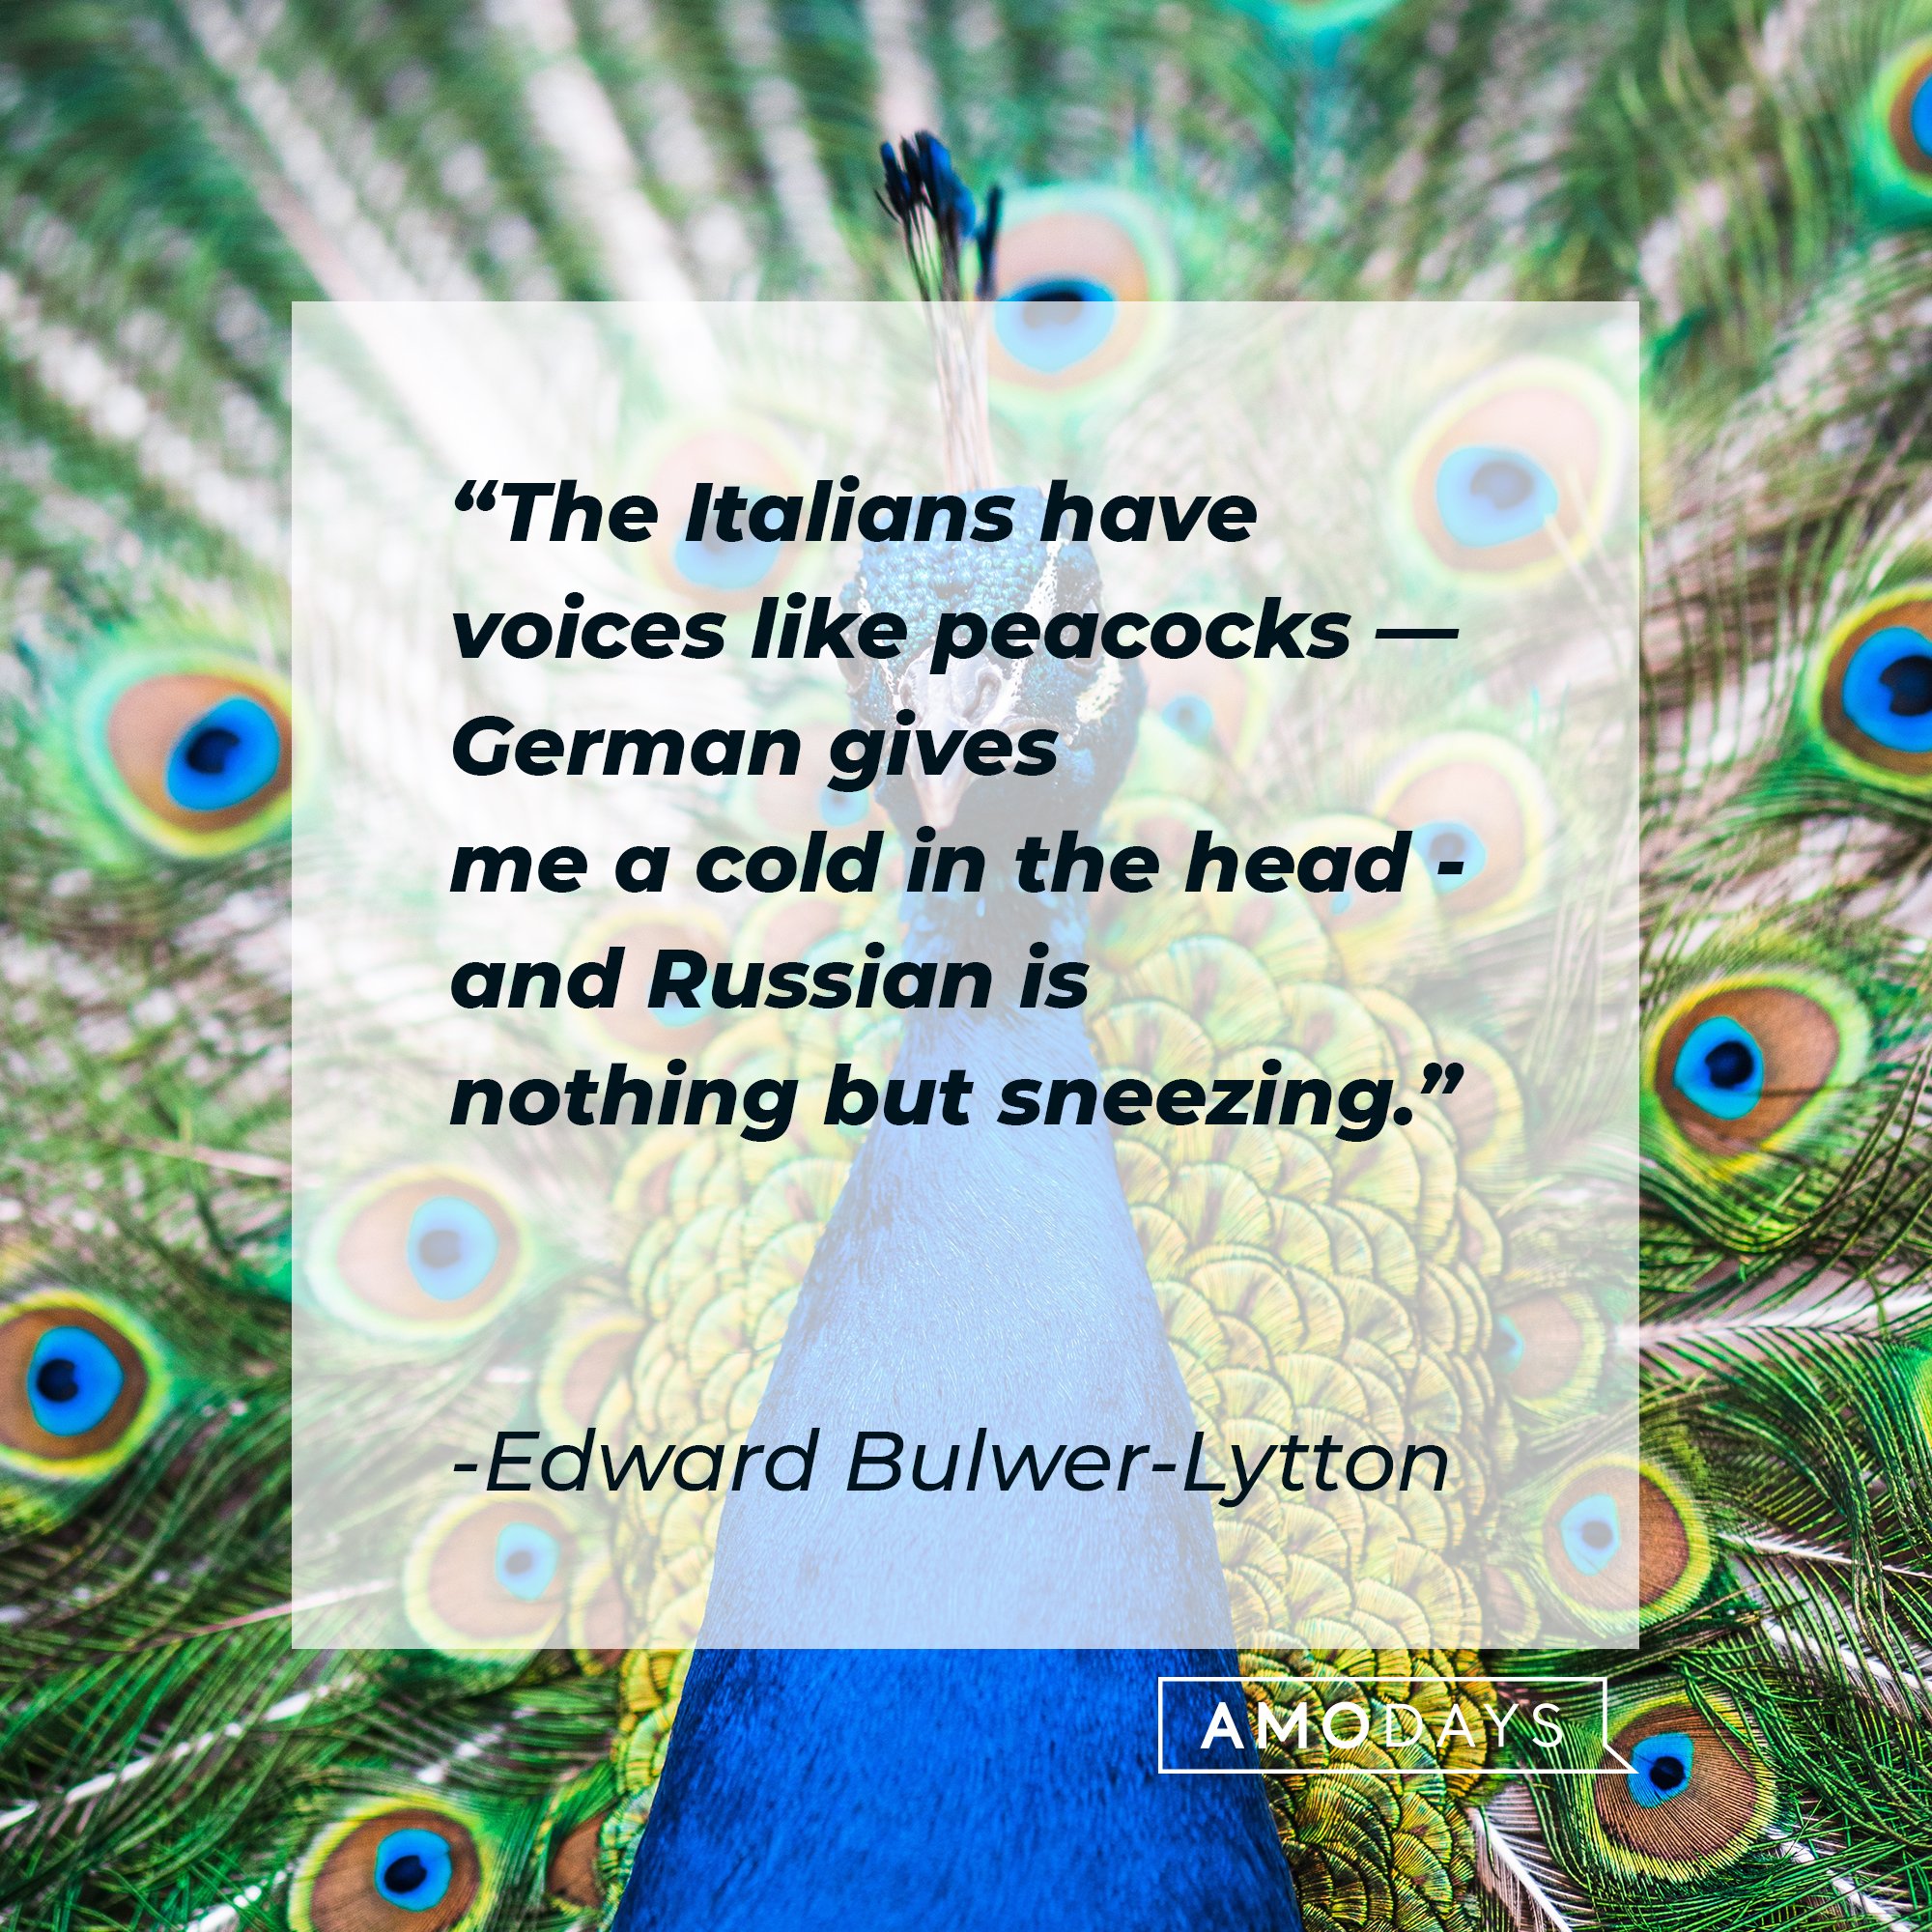 Edward Bulwer-Lytton’s quote: "The Italians have voices like peacocks — German gives me a cold in the head - and Russian is nothing but sneezing." | Image: AmoDays